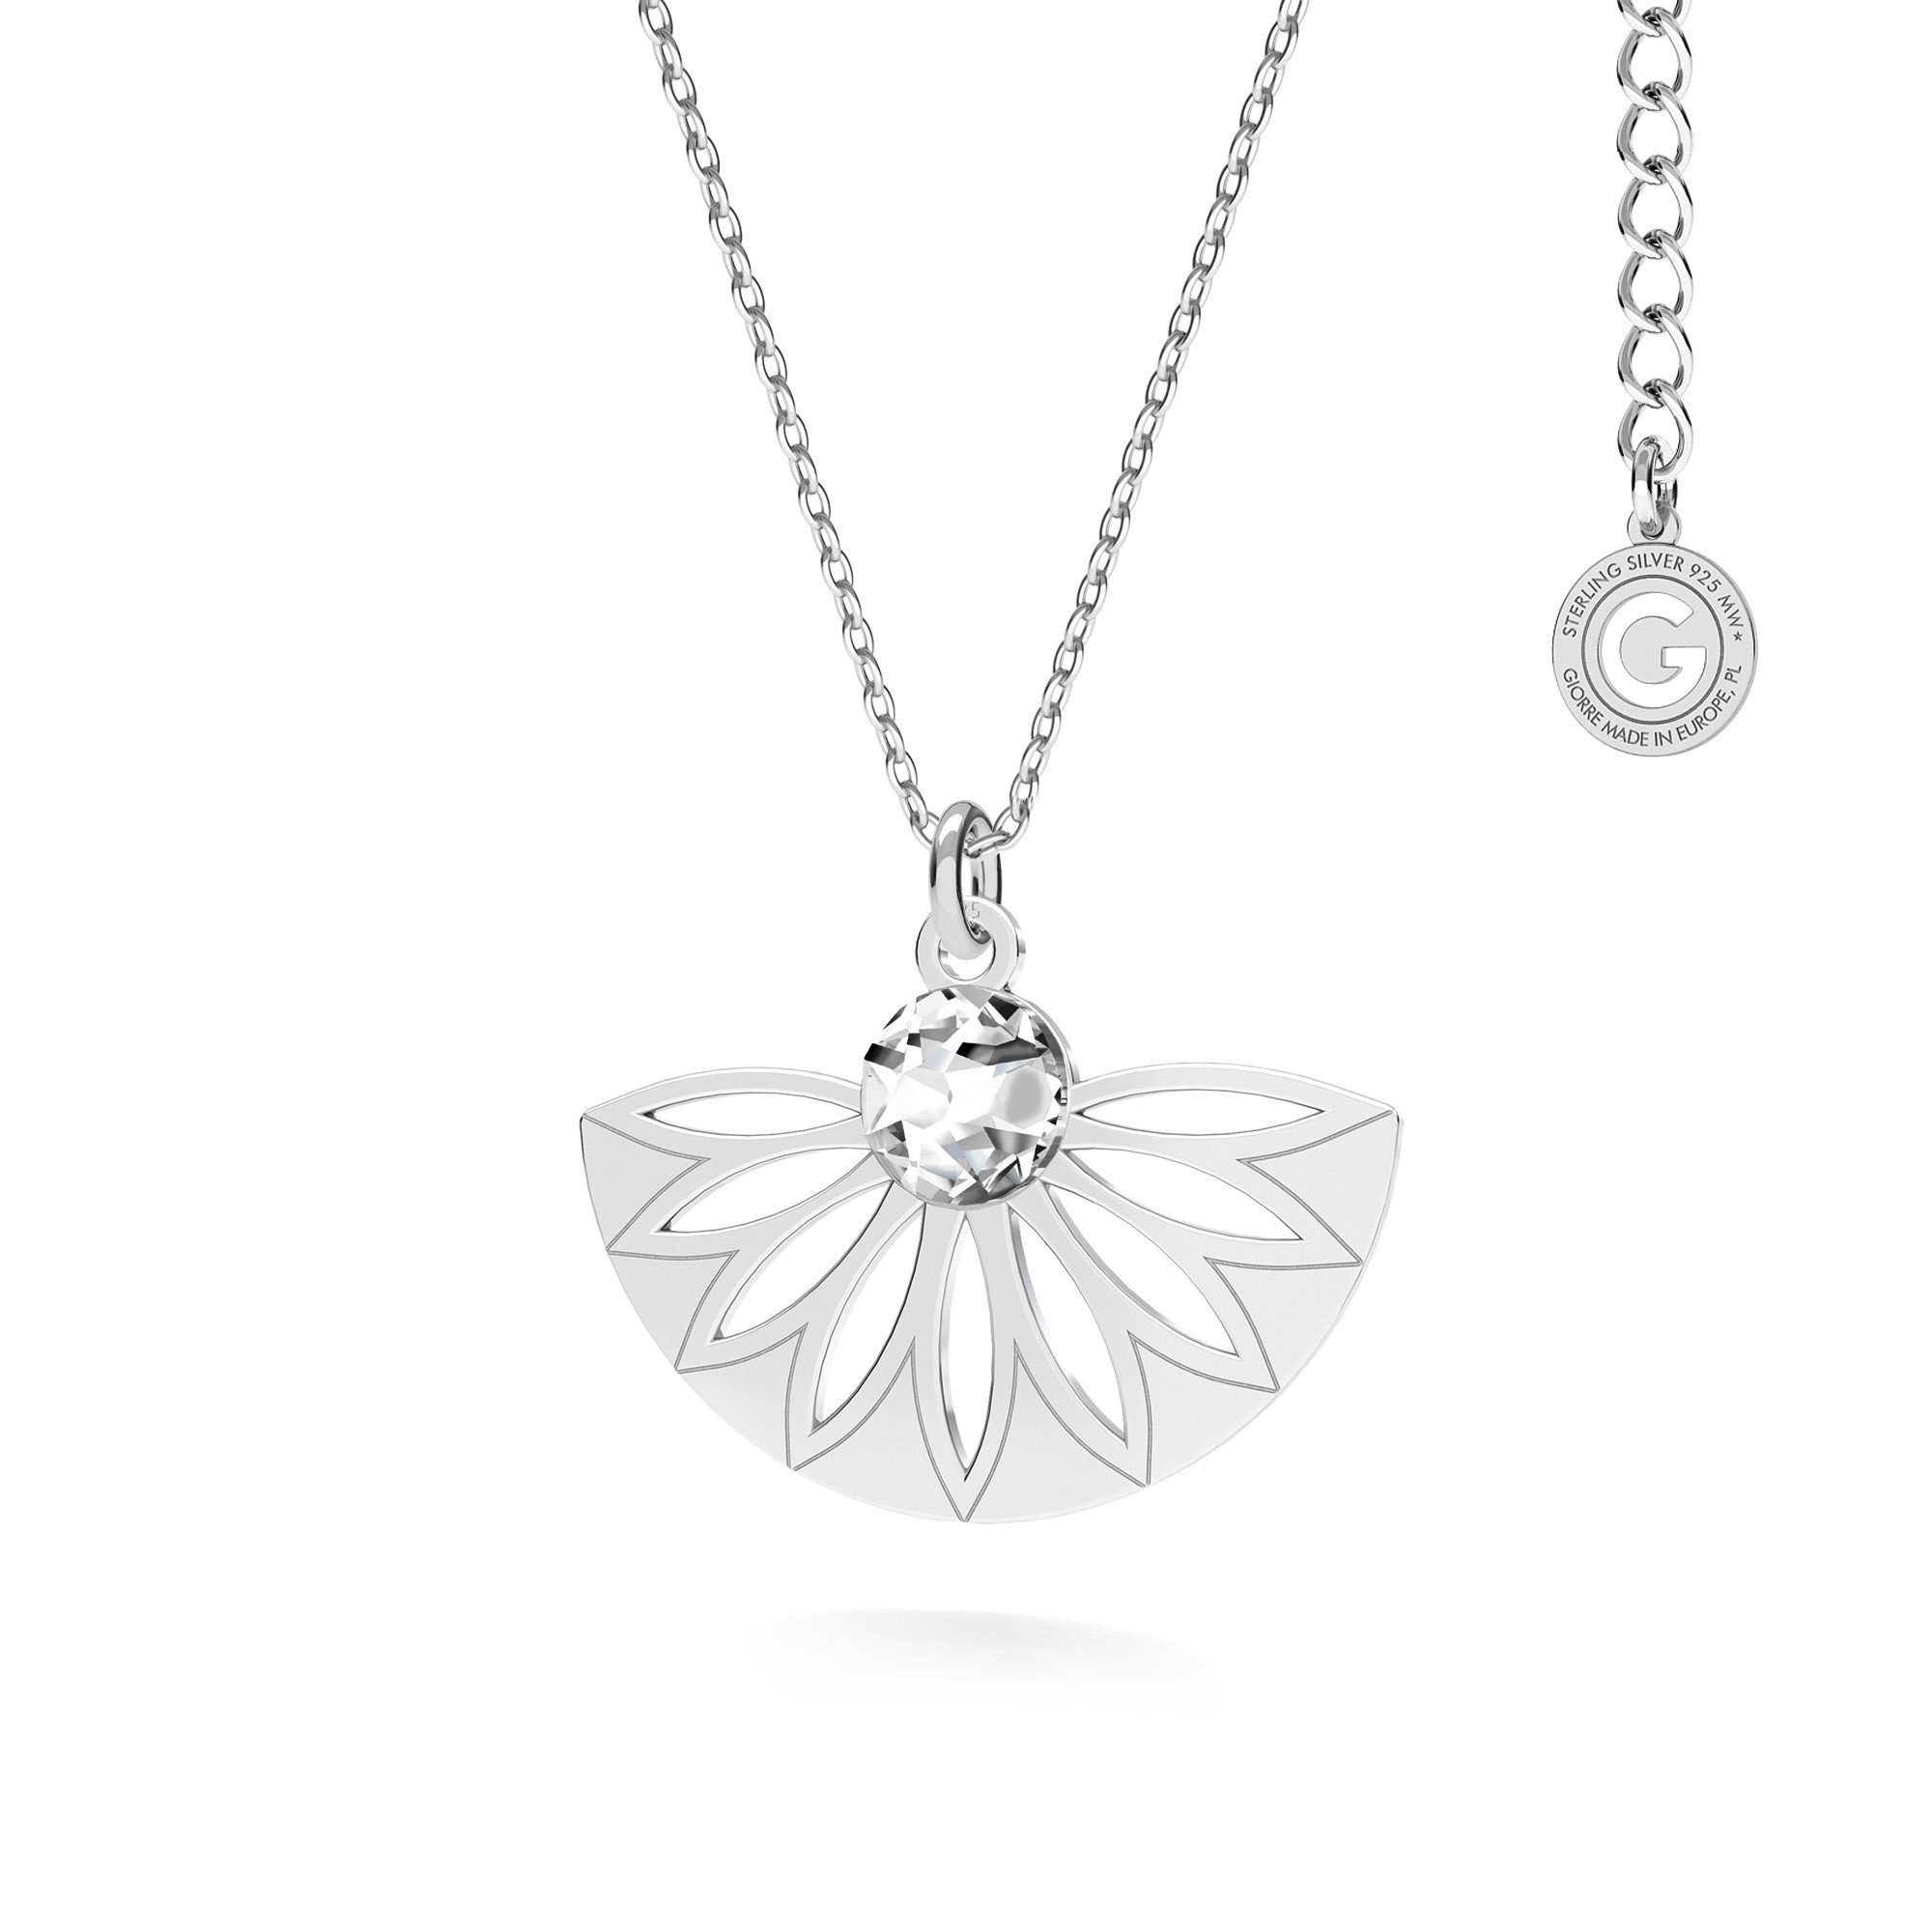 T°ra'vel'' Necklace - hand fan with Swarovski Crystal, sterling silver 925